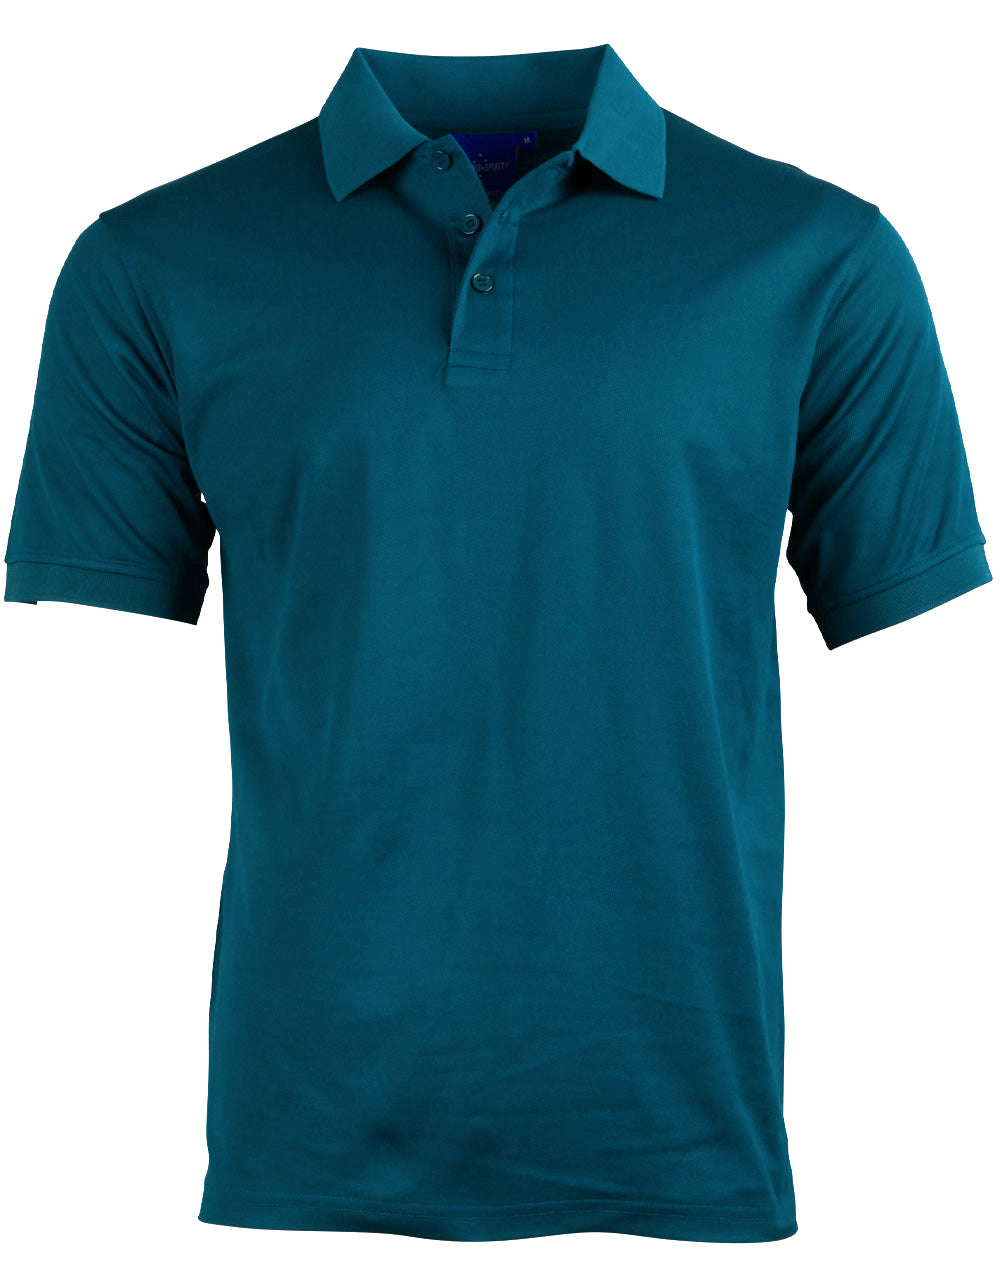 Victory Truedry Polo Shirt - made by AIW